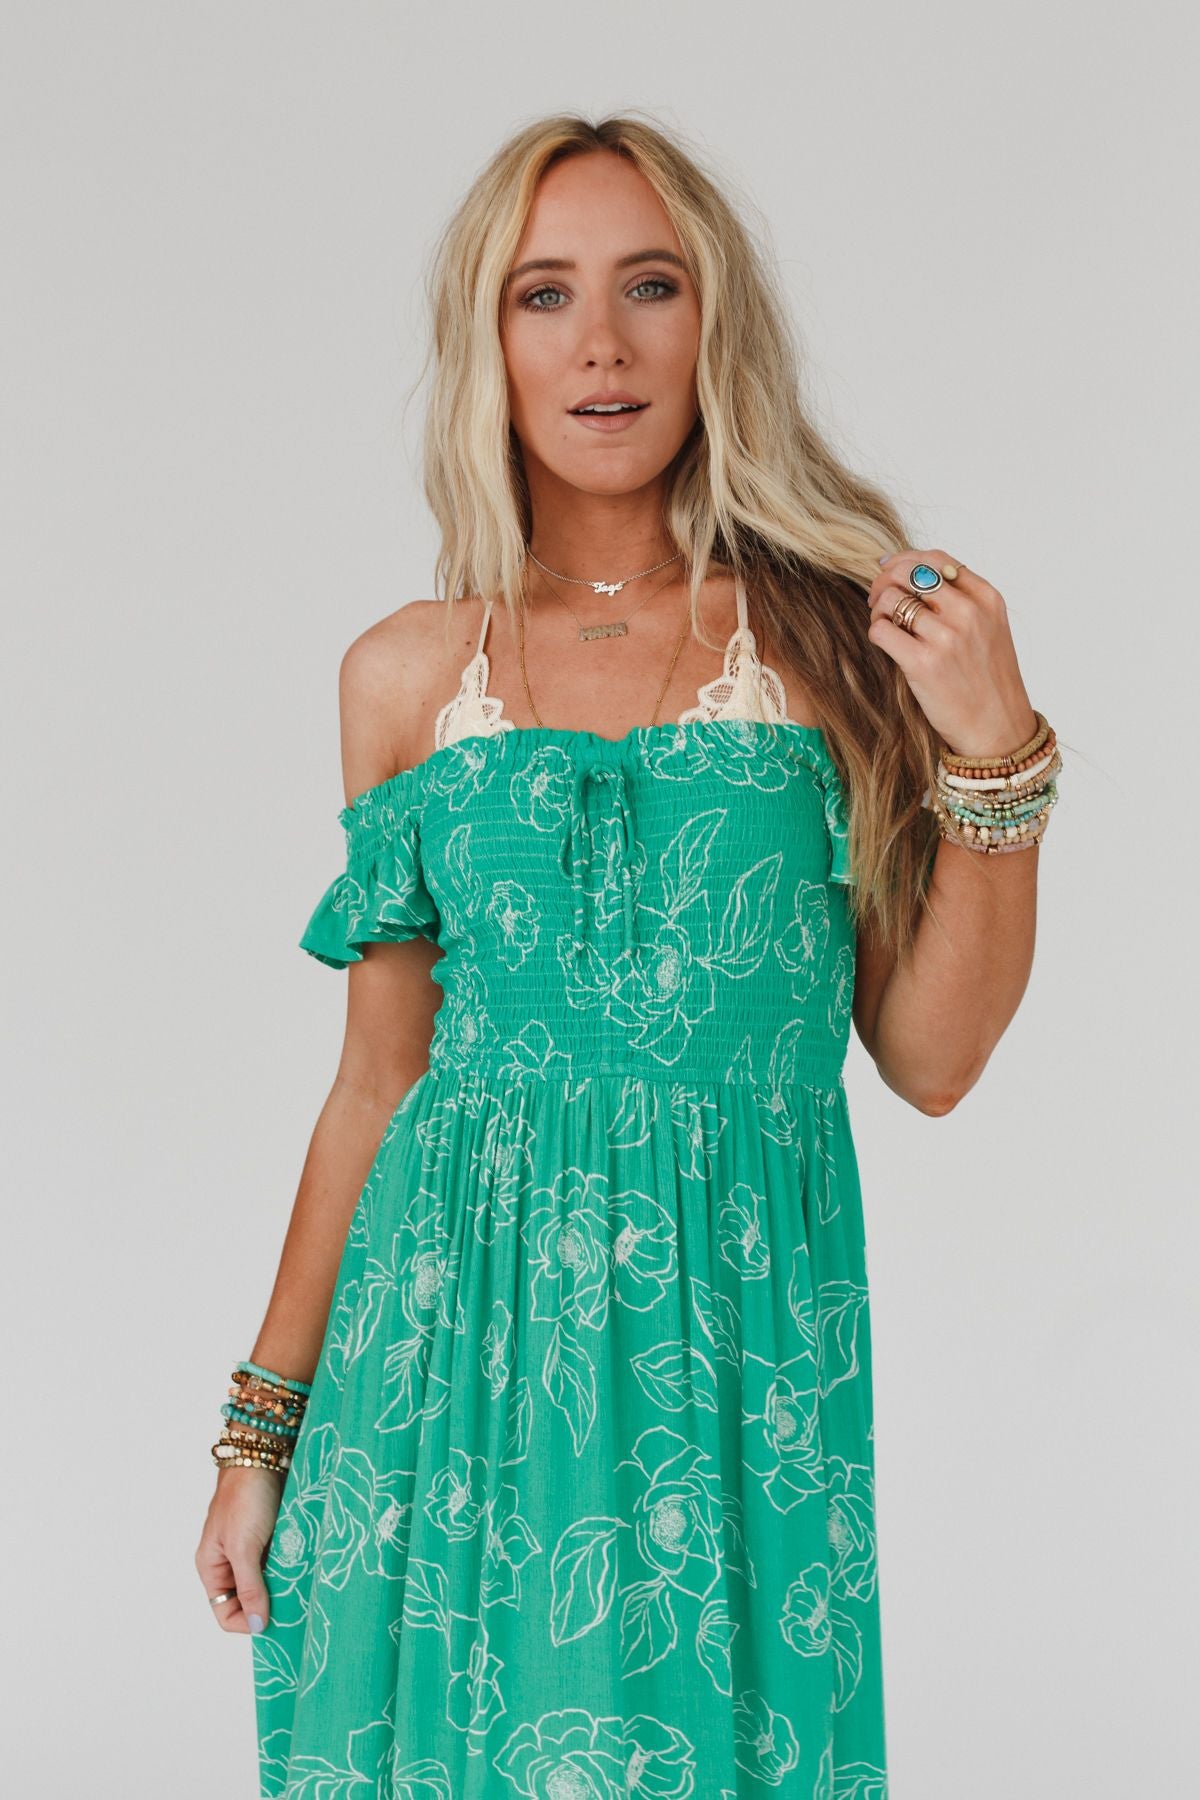 Blooming Love Off The Shoulder Maxi Dress - Green